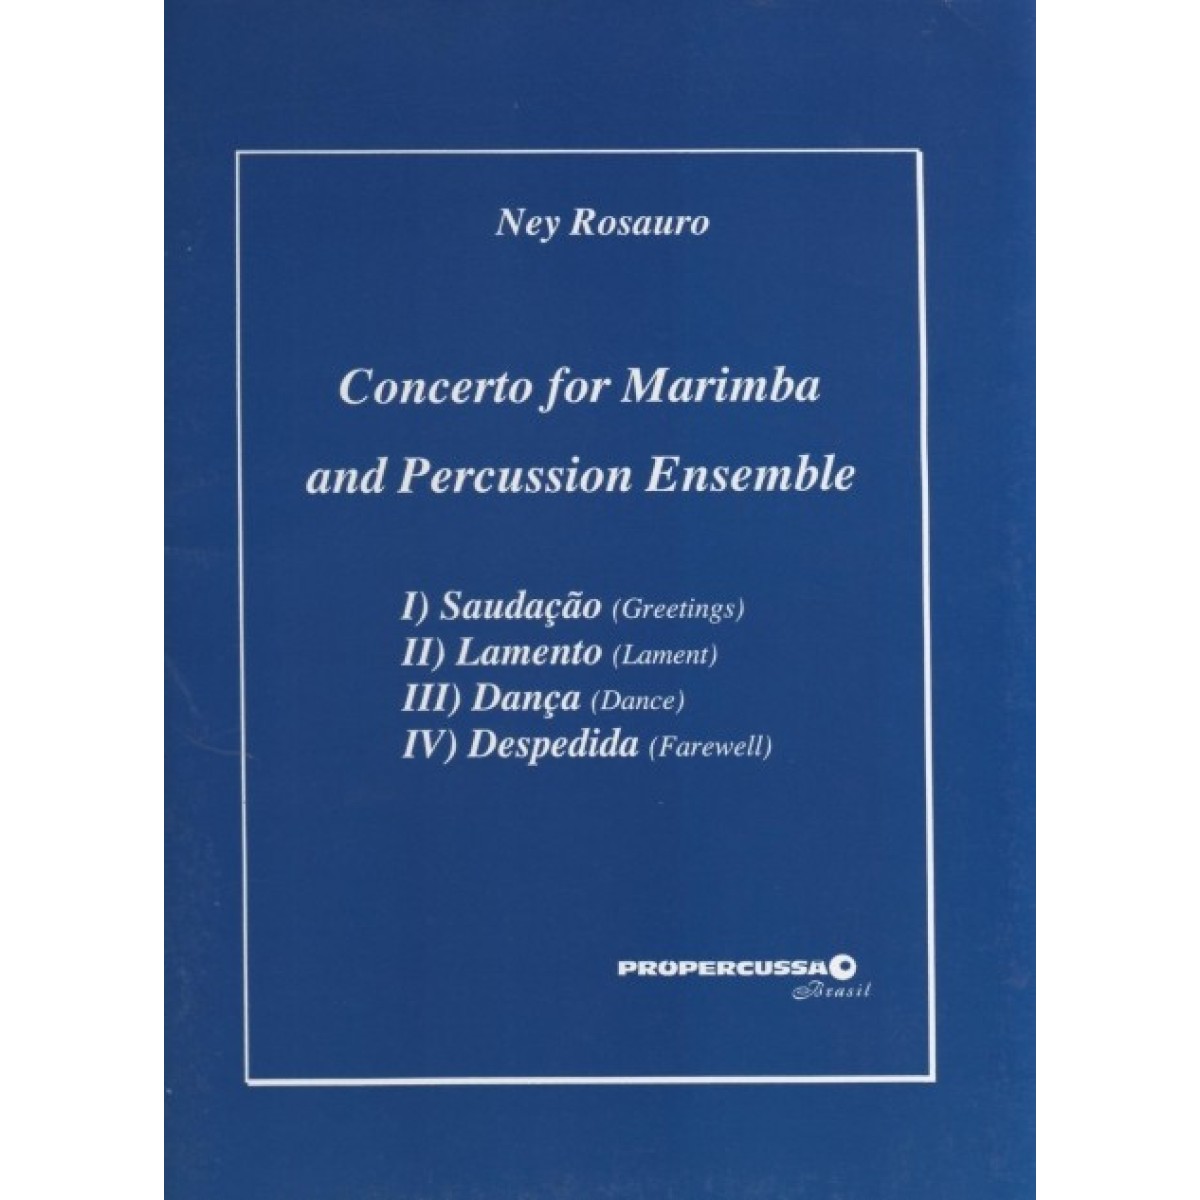 Concerto For Marimba And Percussion Ensemble by Ney Rosauro